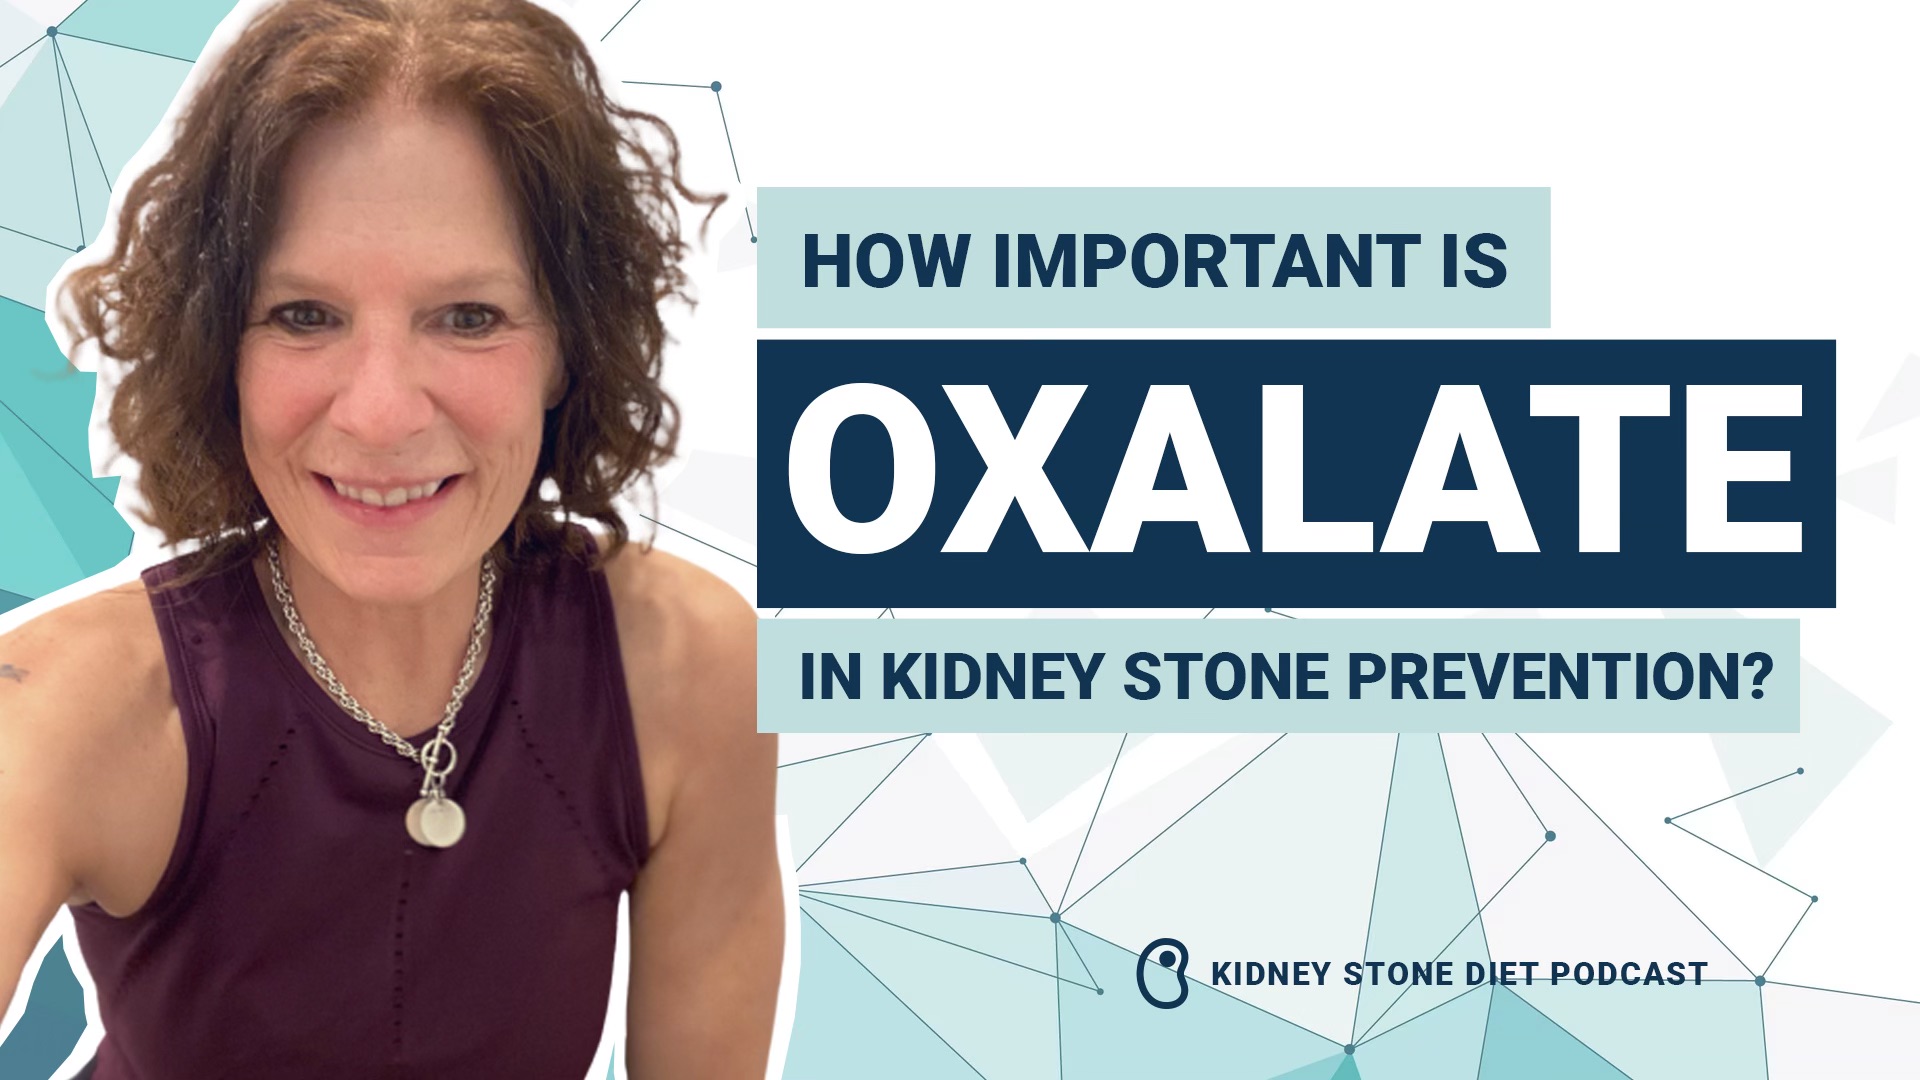 How important is oxalate in kidney stone prevention?